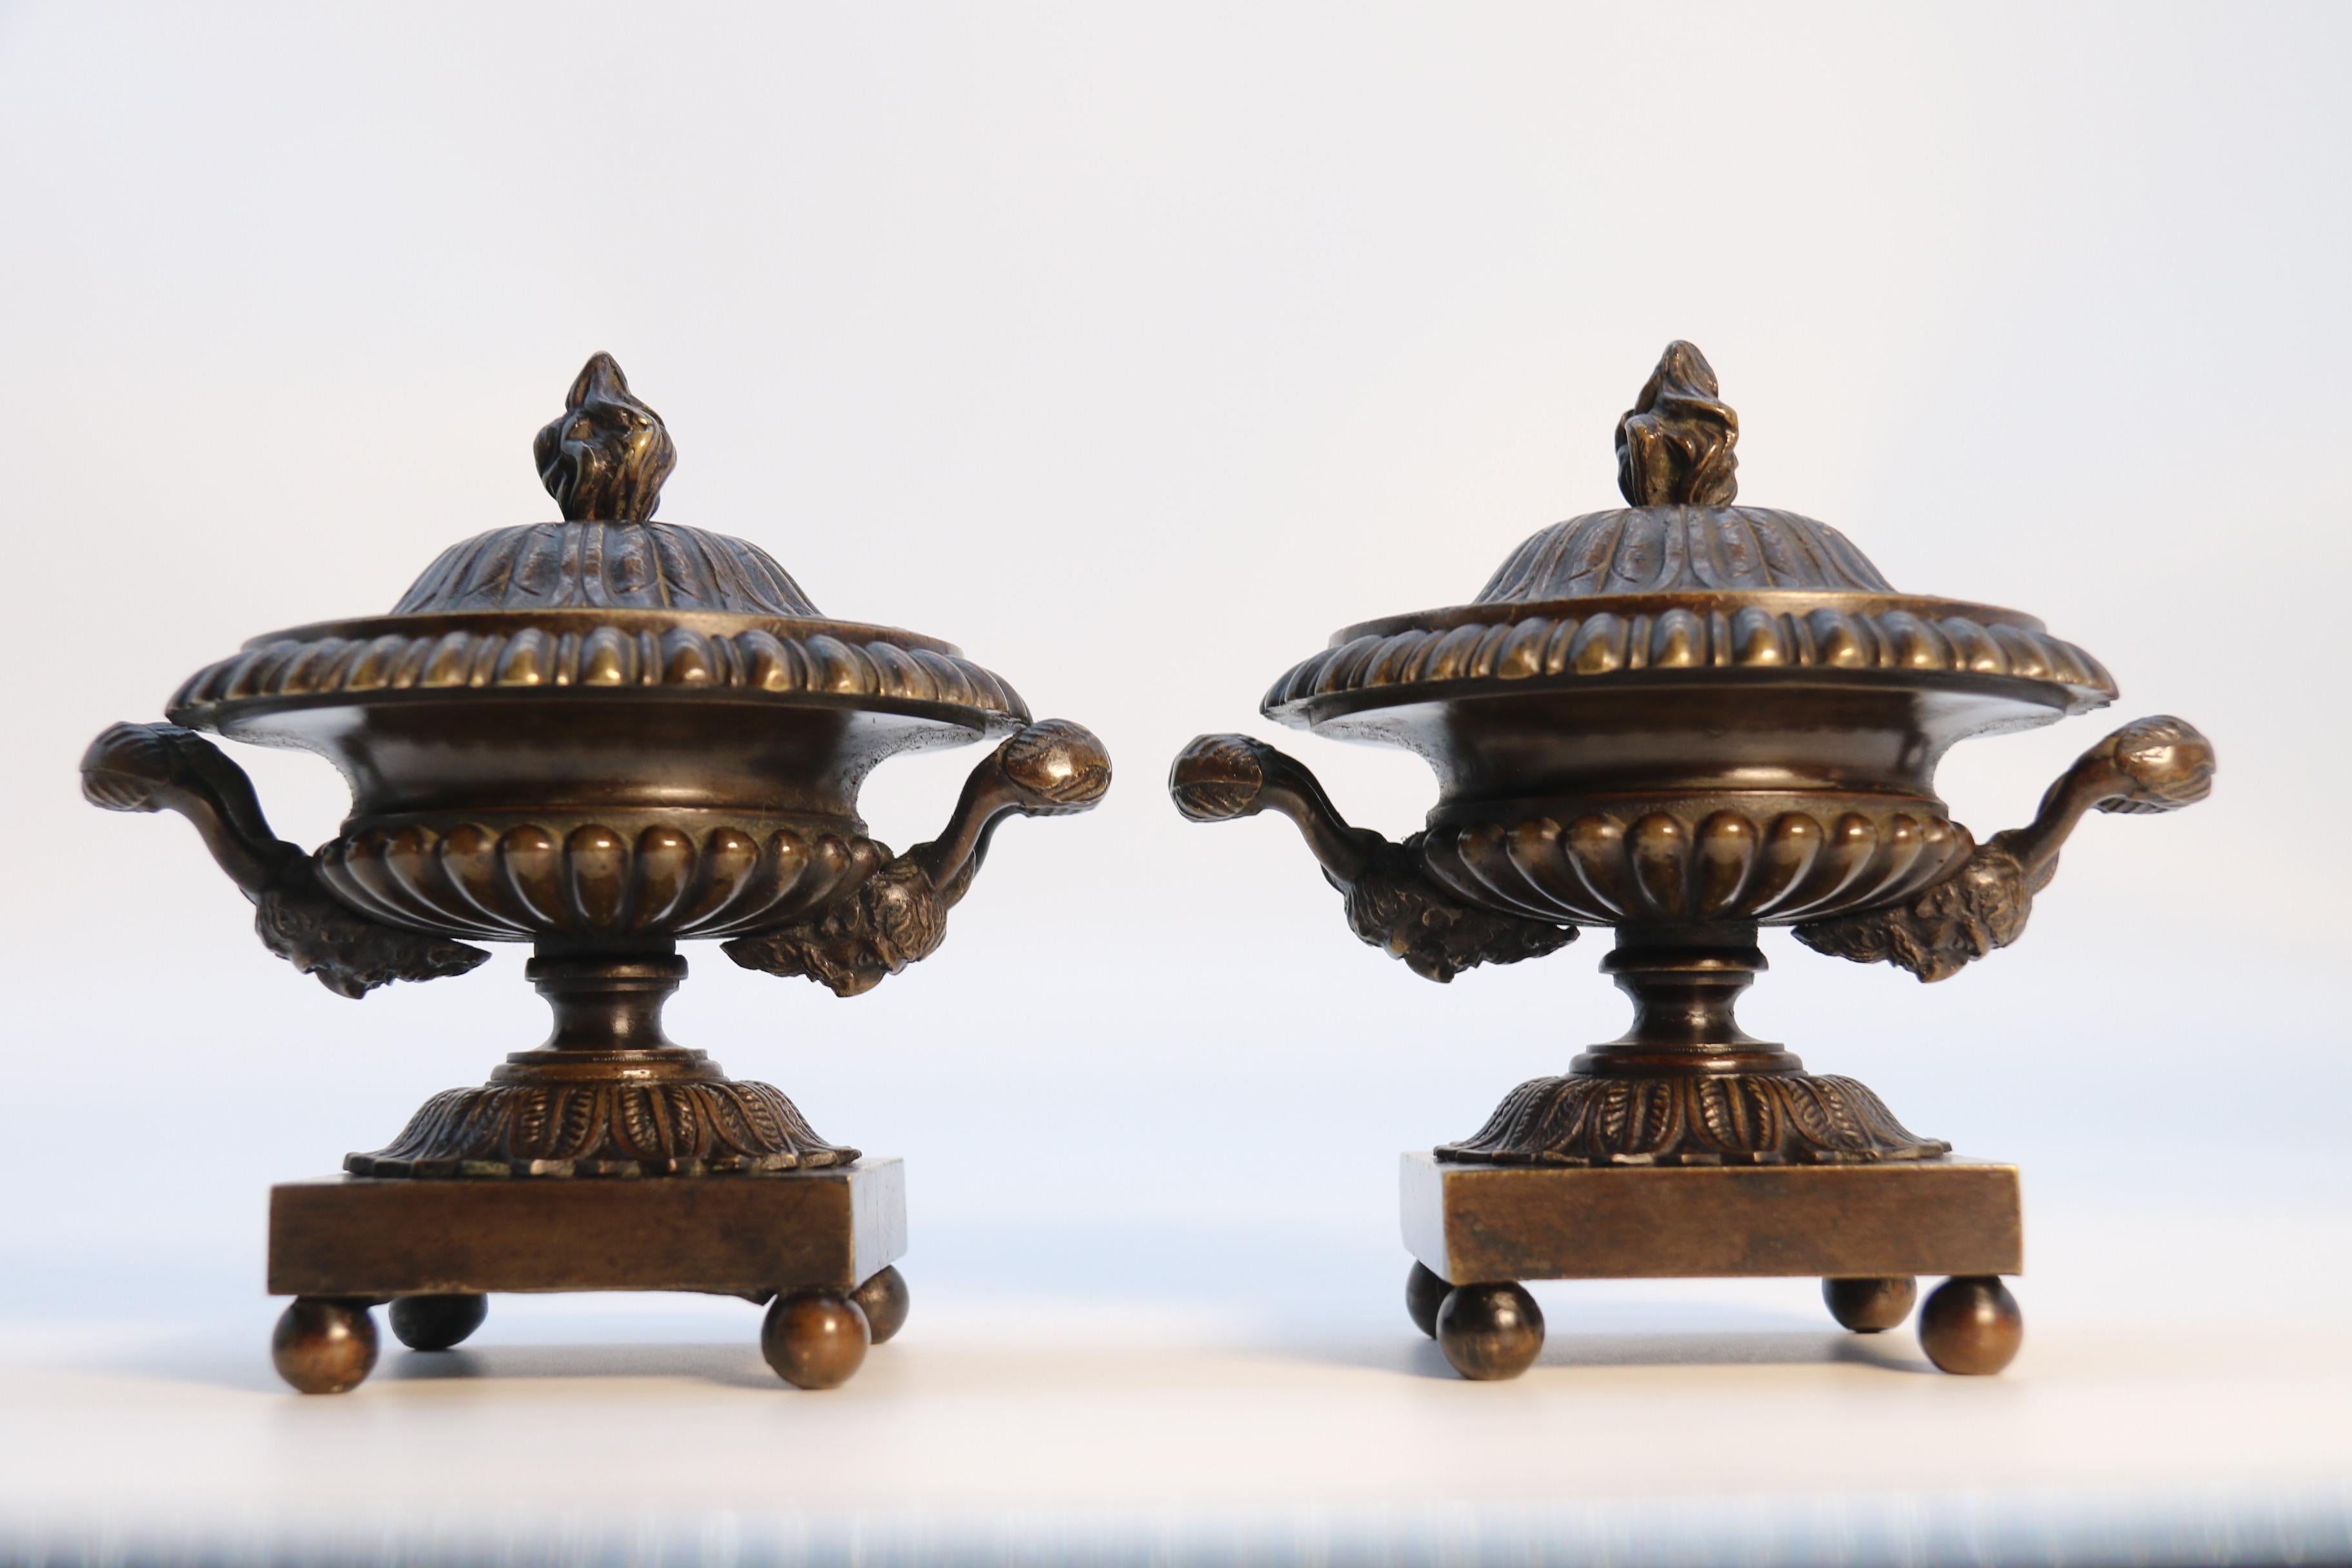 Antique  pair of English Regency period classical bronze urns,  circa 1820 For Sale 11